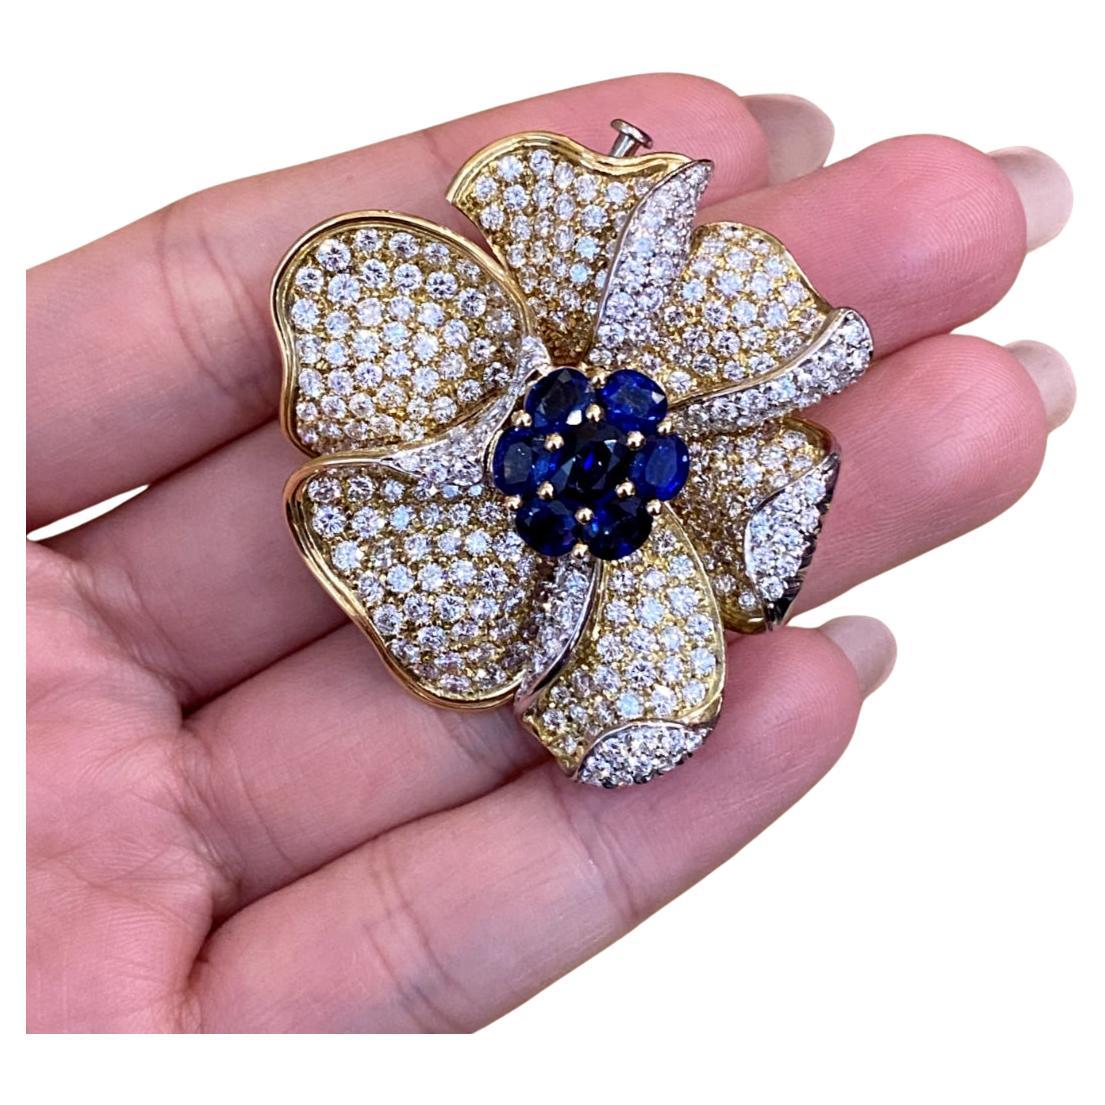 Picchiotti Sapphire and Diamond Flower Brooch in 18k Yellow Gold Large For Sale